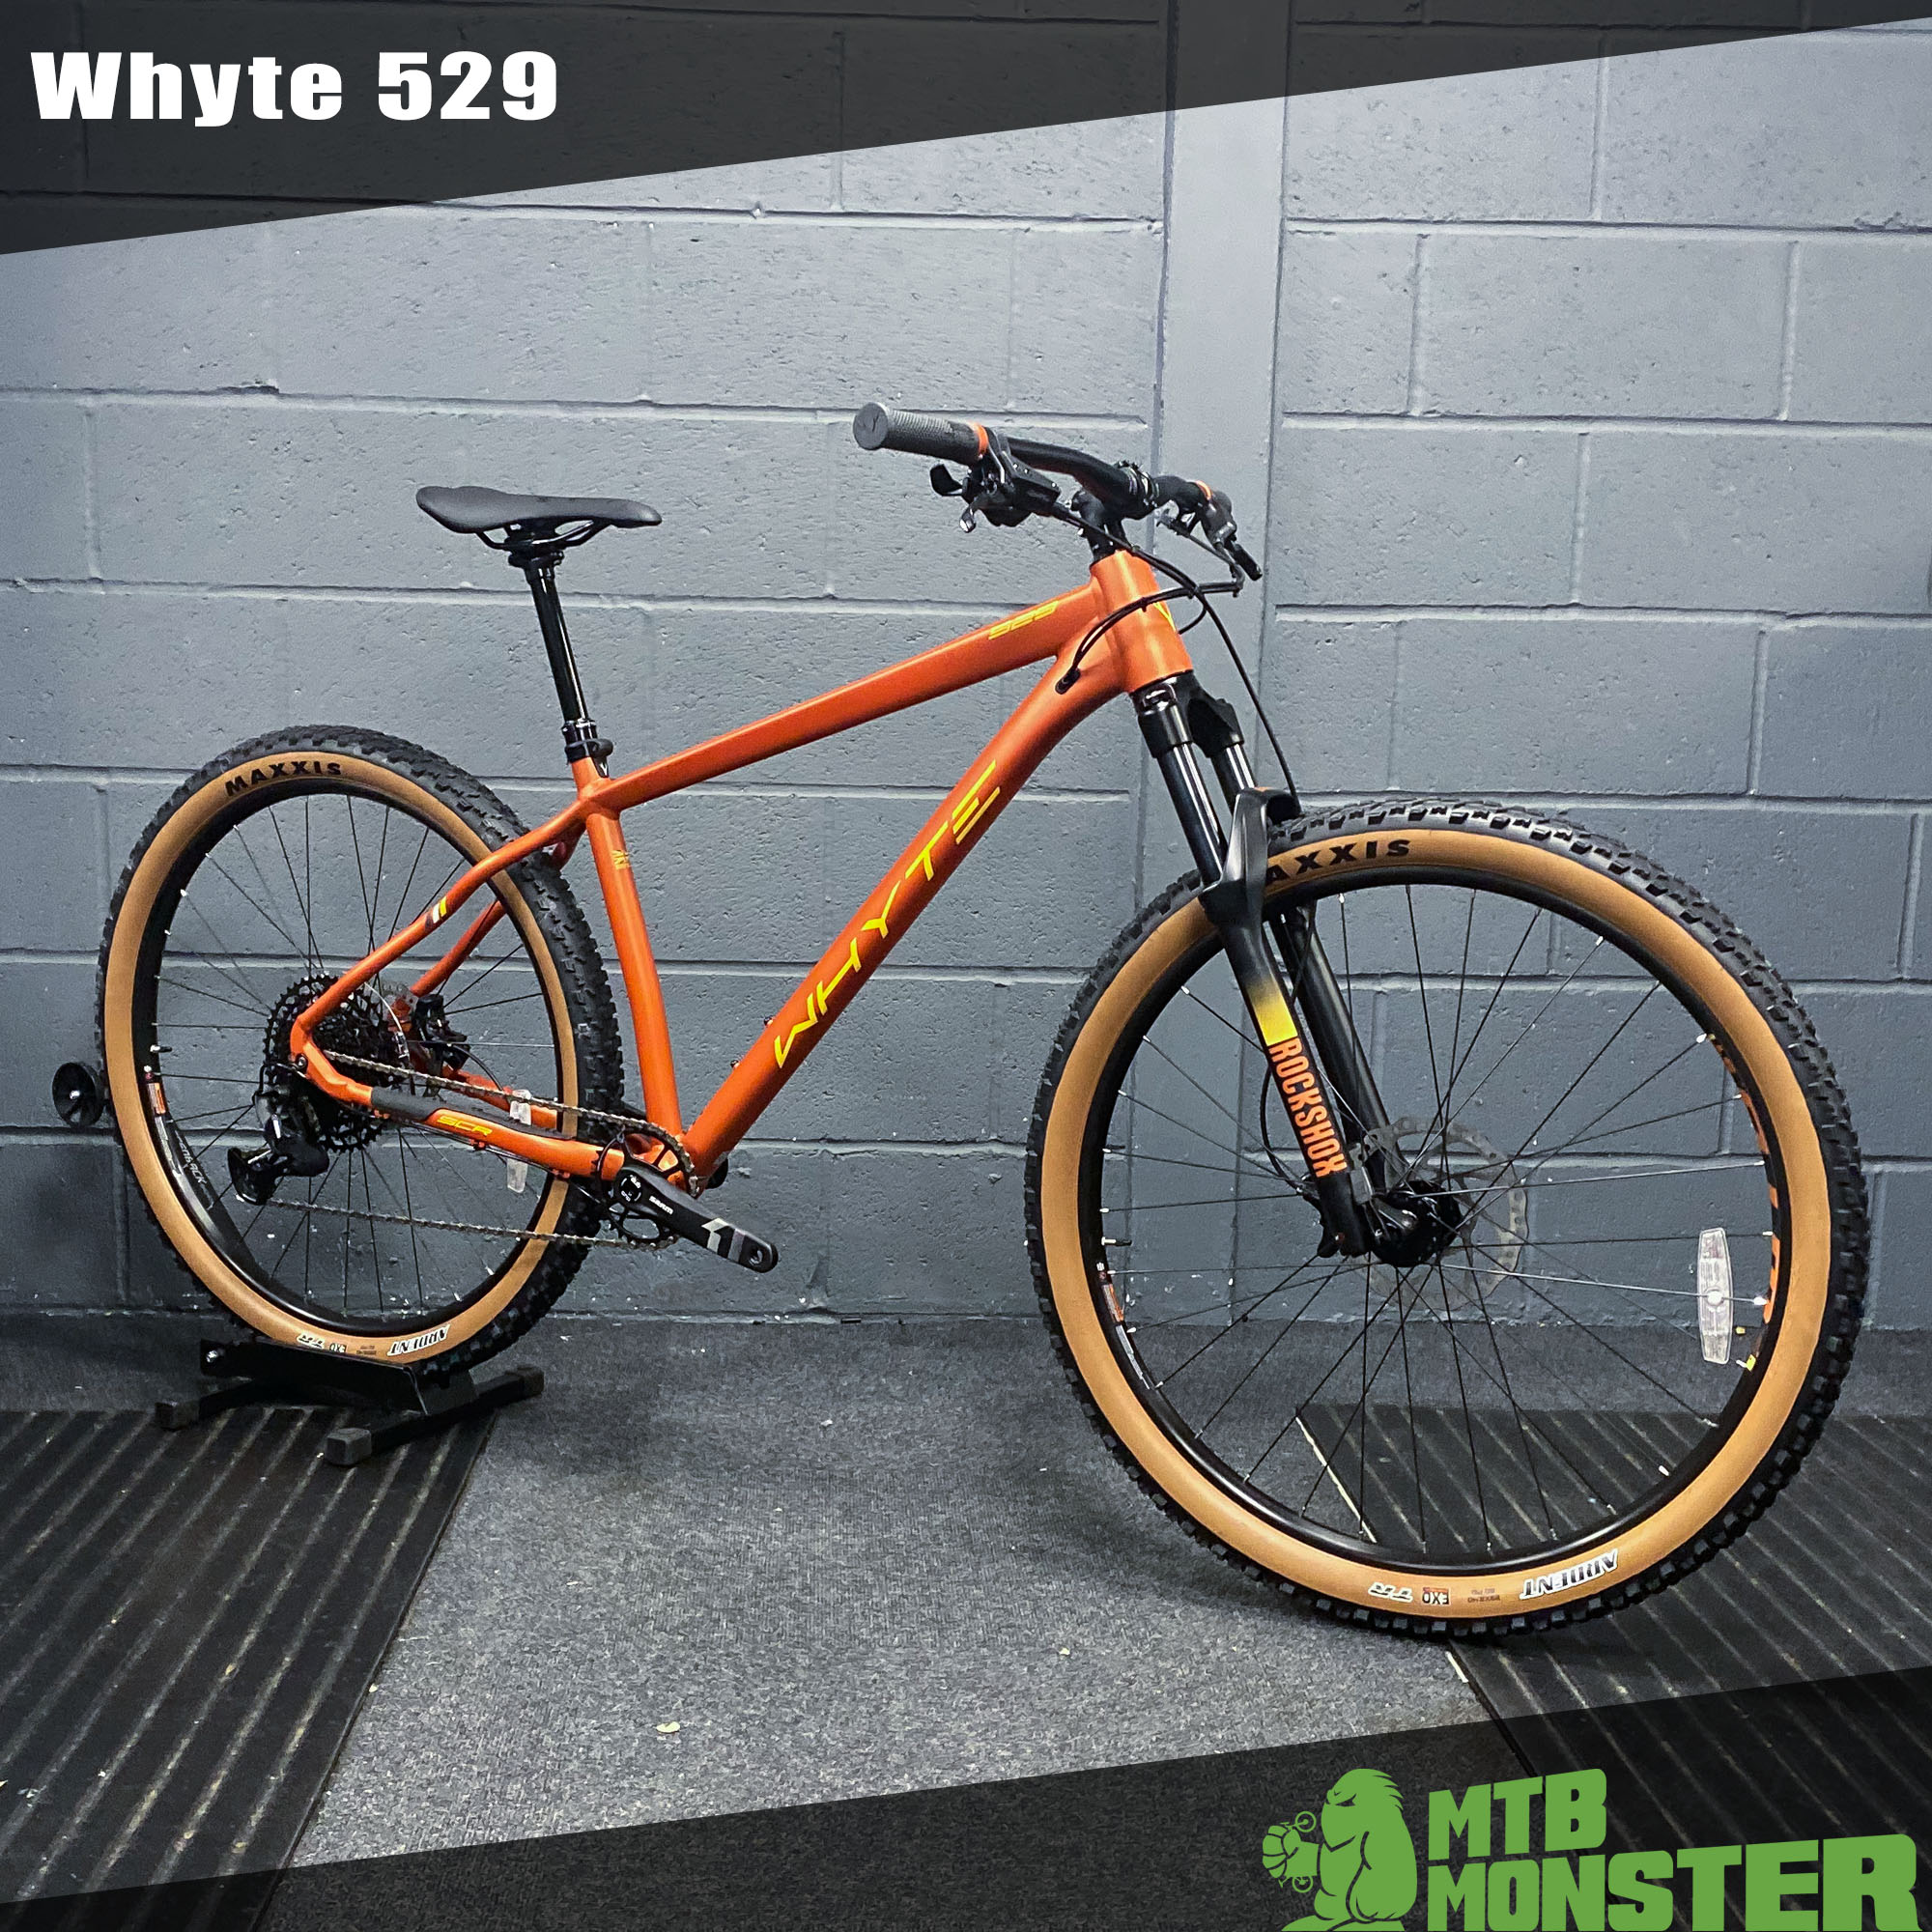 The Whyte 529